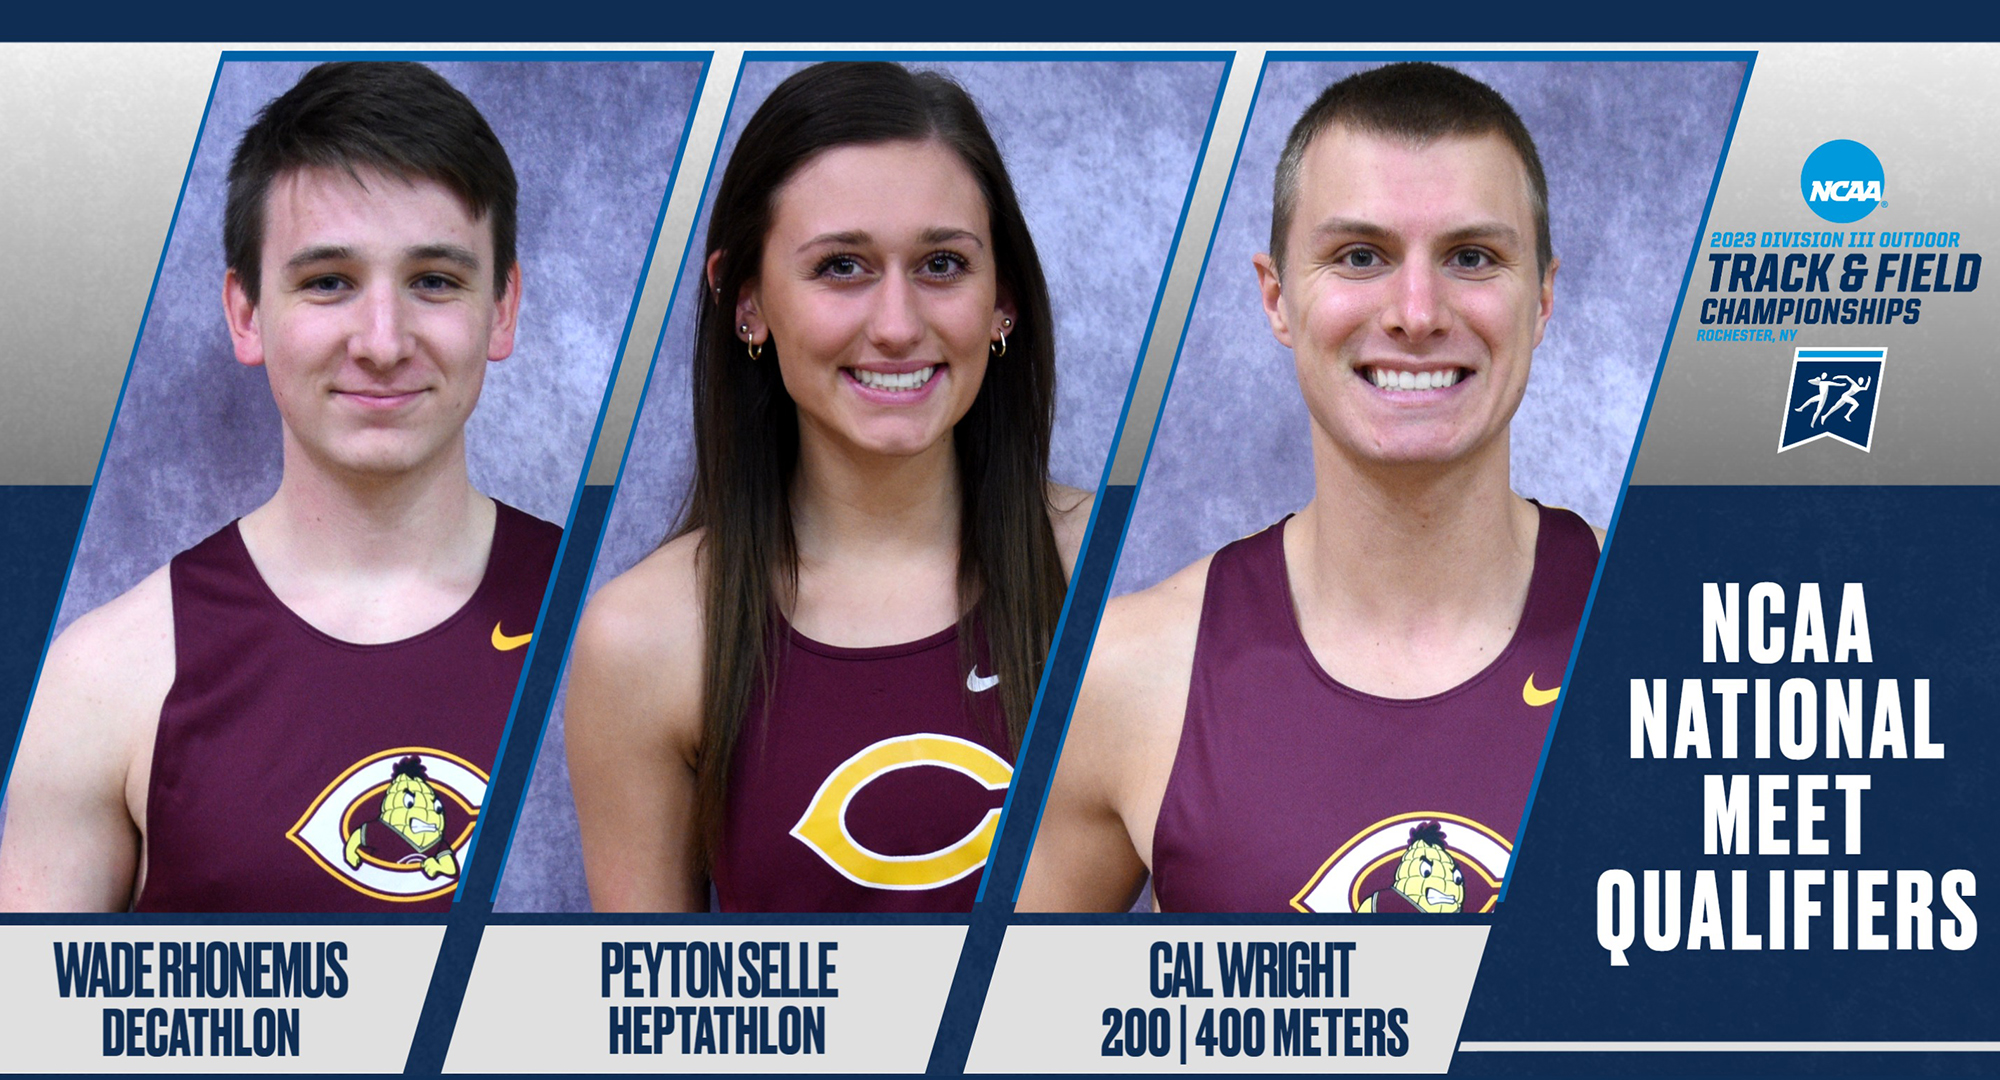 Concordia athletes Wade Rhonemus, Peyton Selle and Cal Wright have all officially qualified for the NCAA Division III National Outdoor Meet.